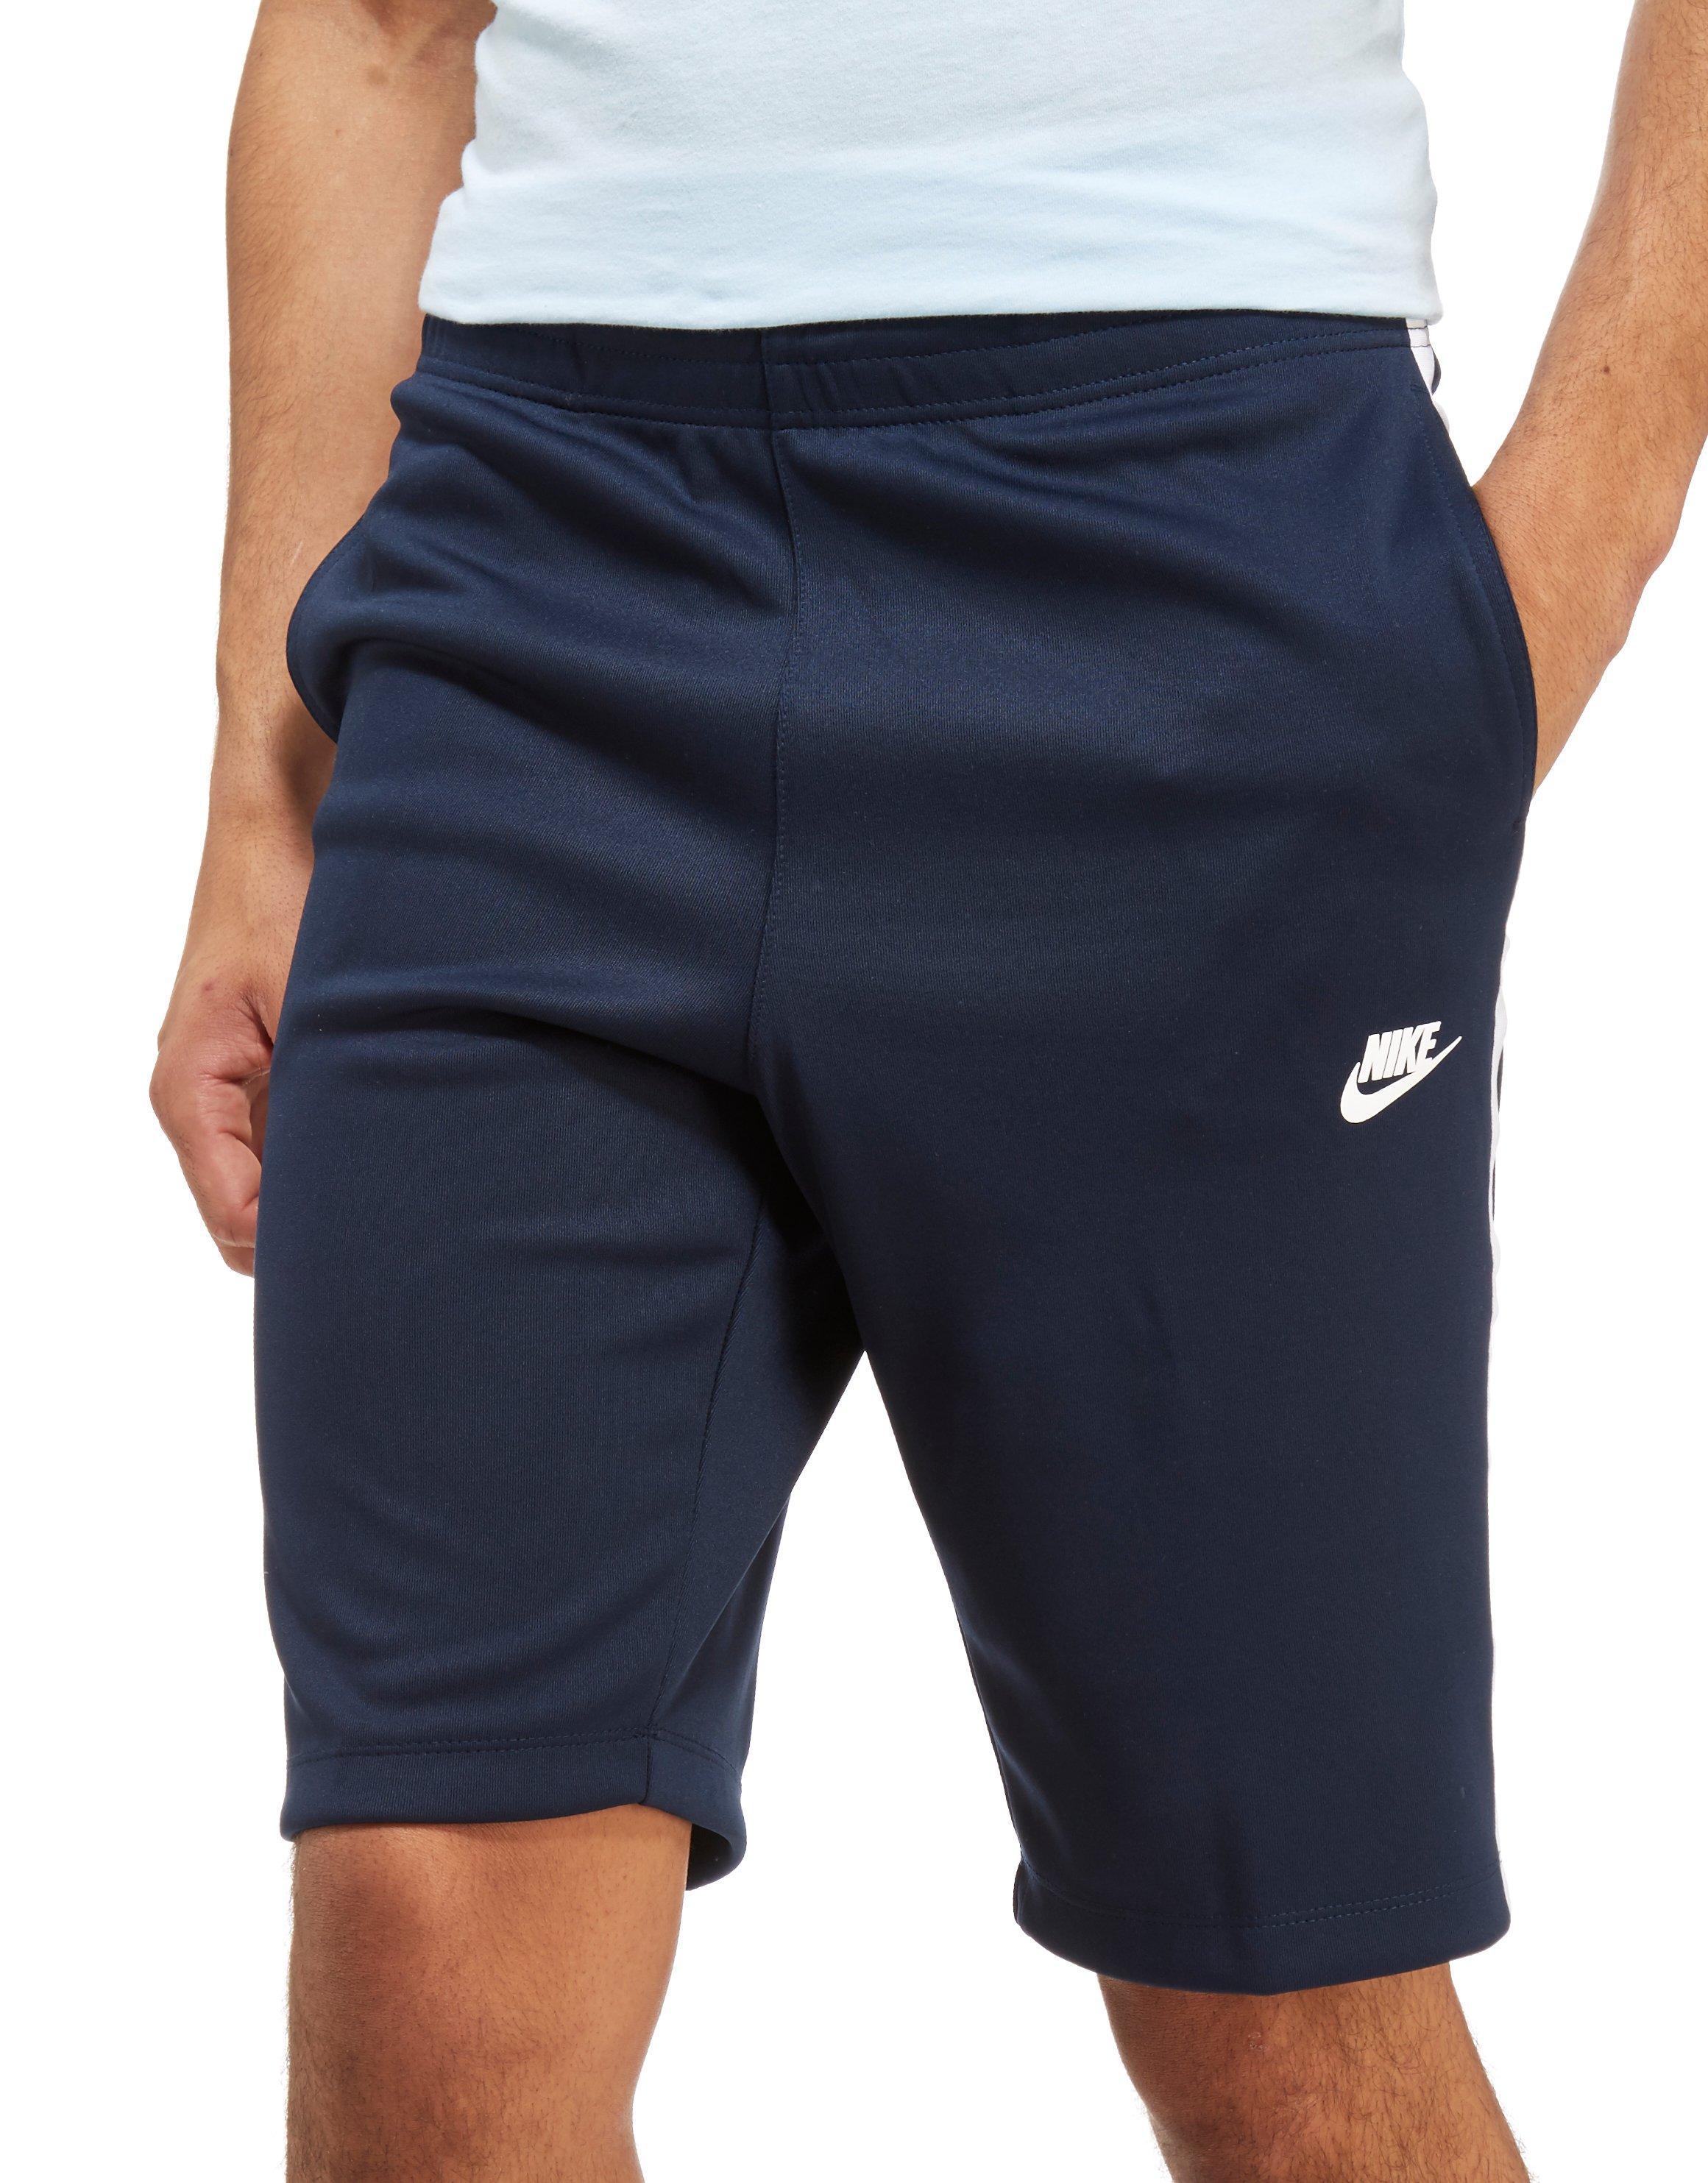 Nike Synthetic Tribute Poly Shorts in Navy/White (Blue) for Men - Lyst